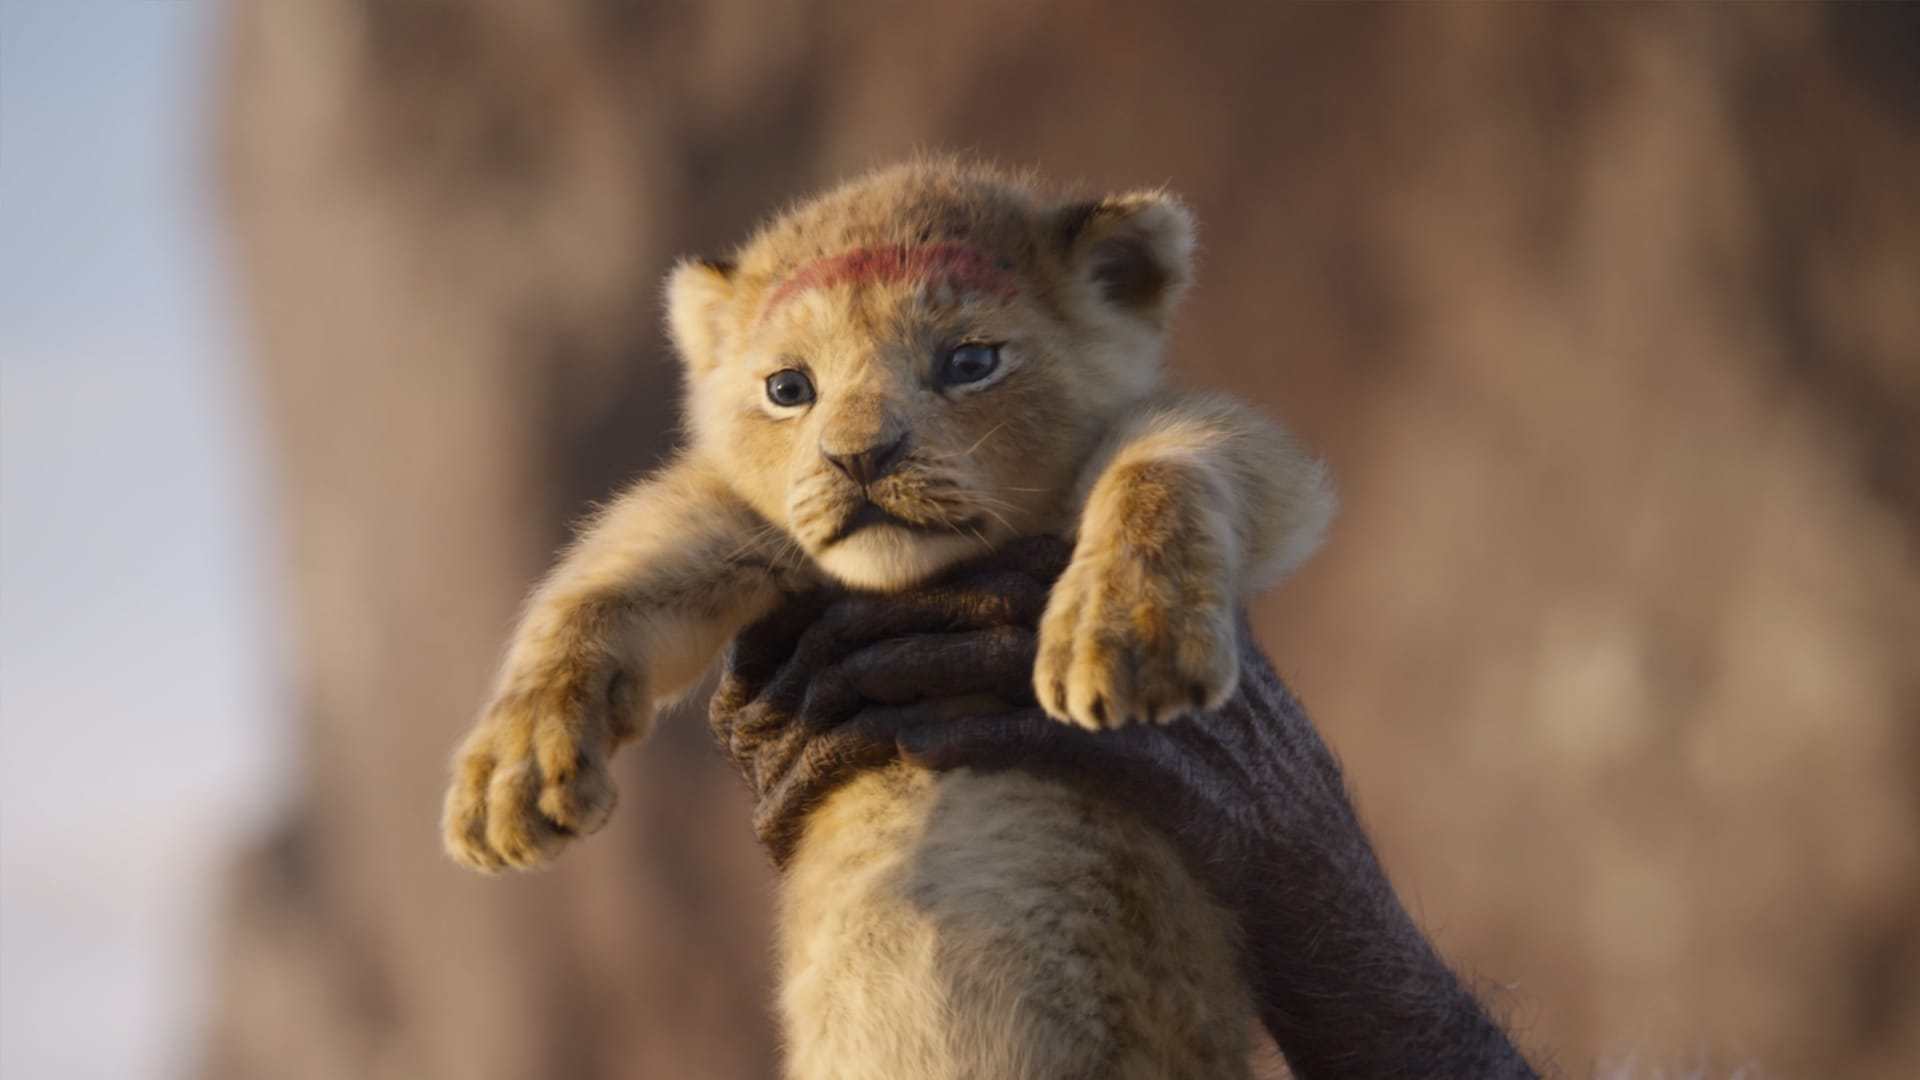 The Lion King' On Track To Gross $150 Million At The Box Office